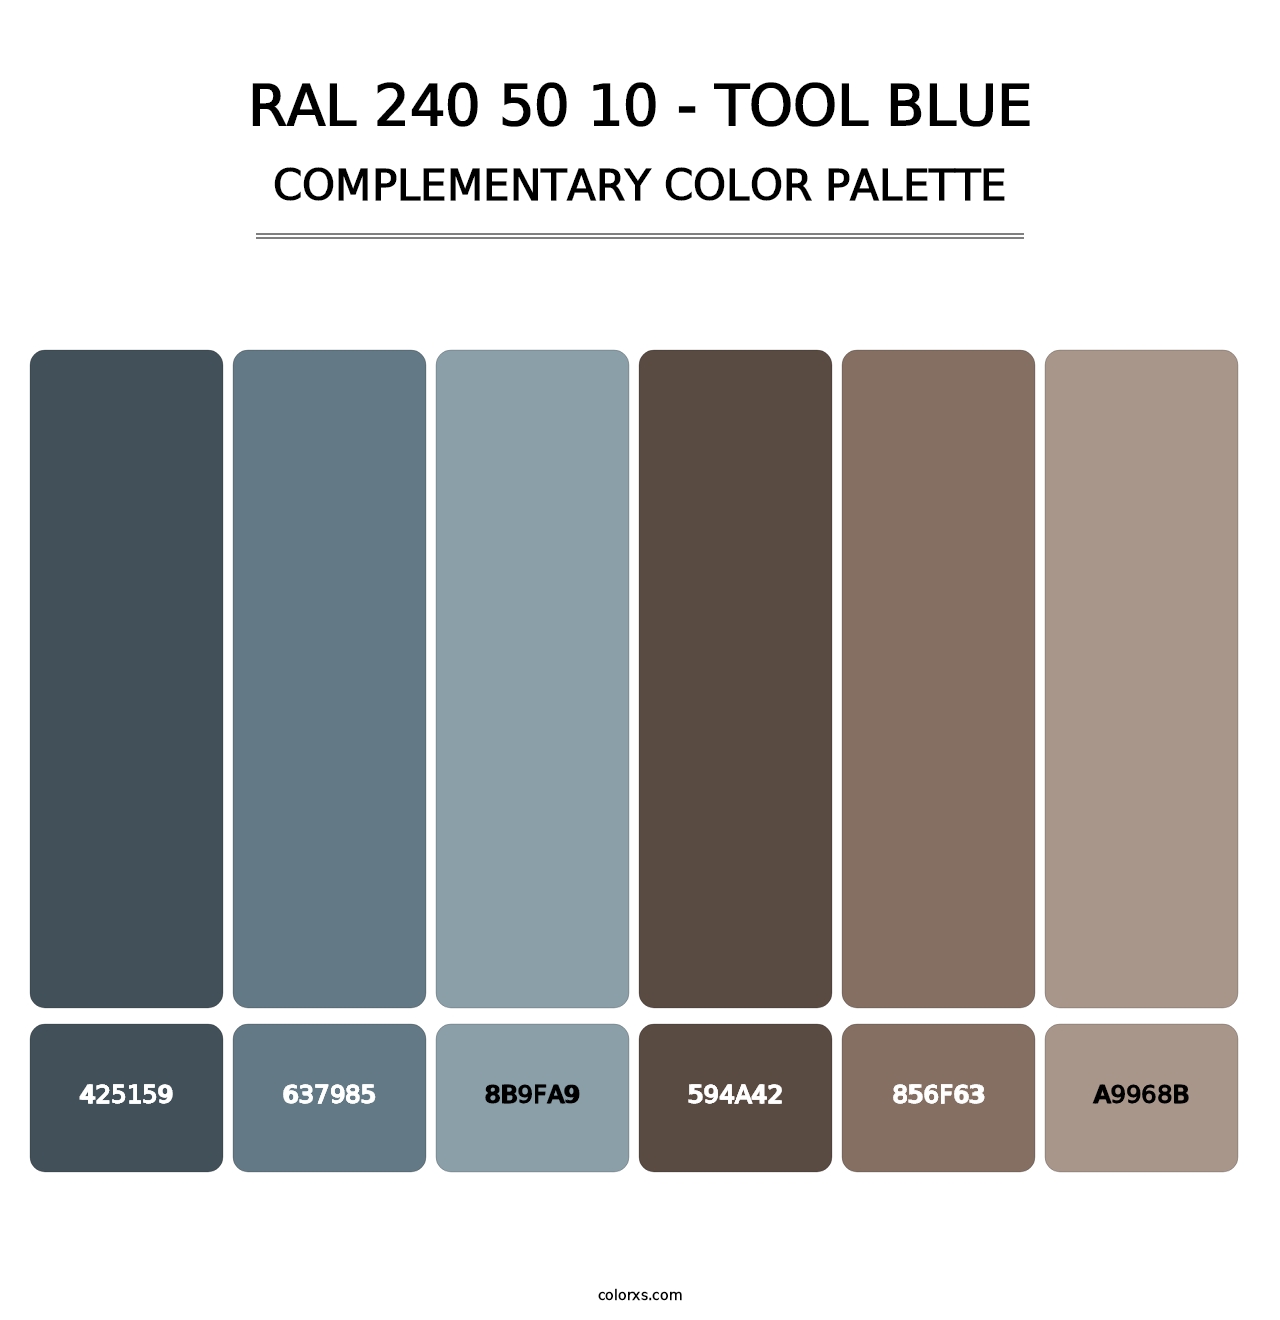 RAL 240 50 10 - Tool Blue - Complementary Color Palette